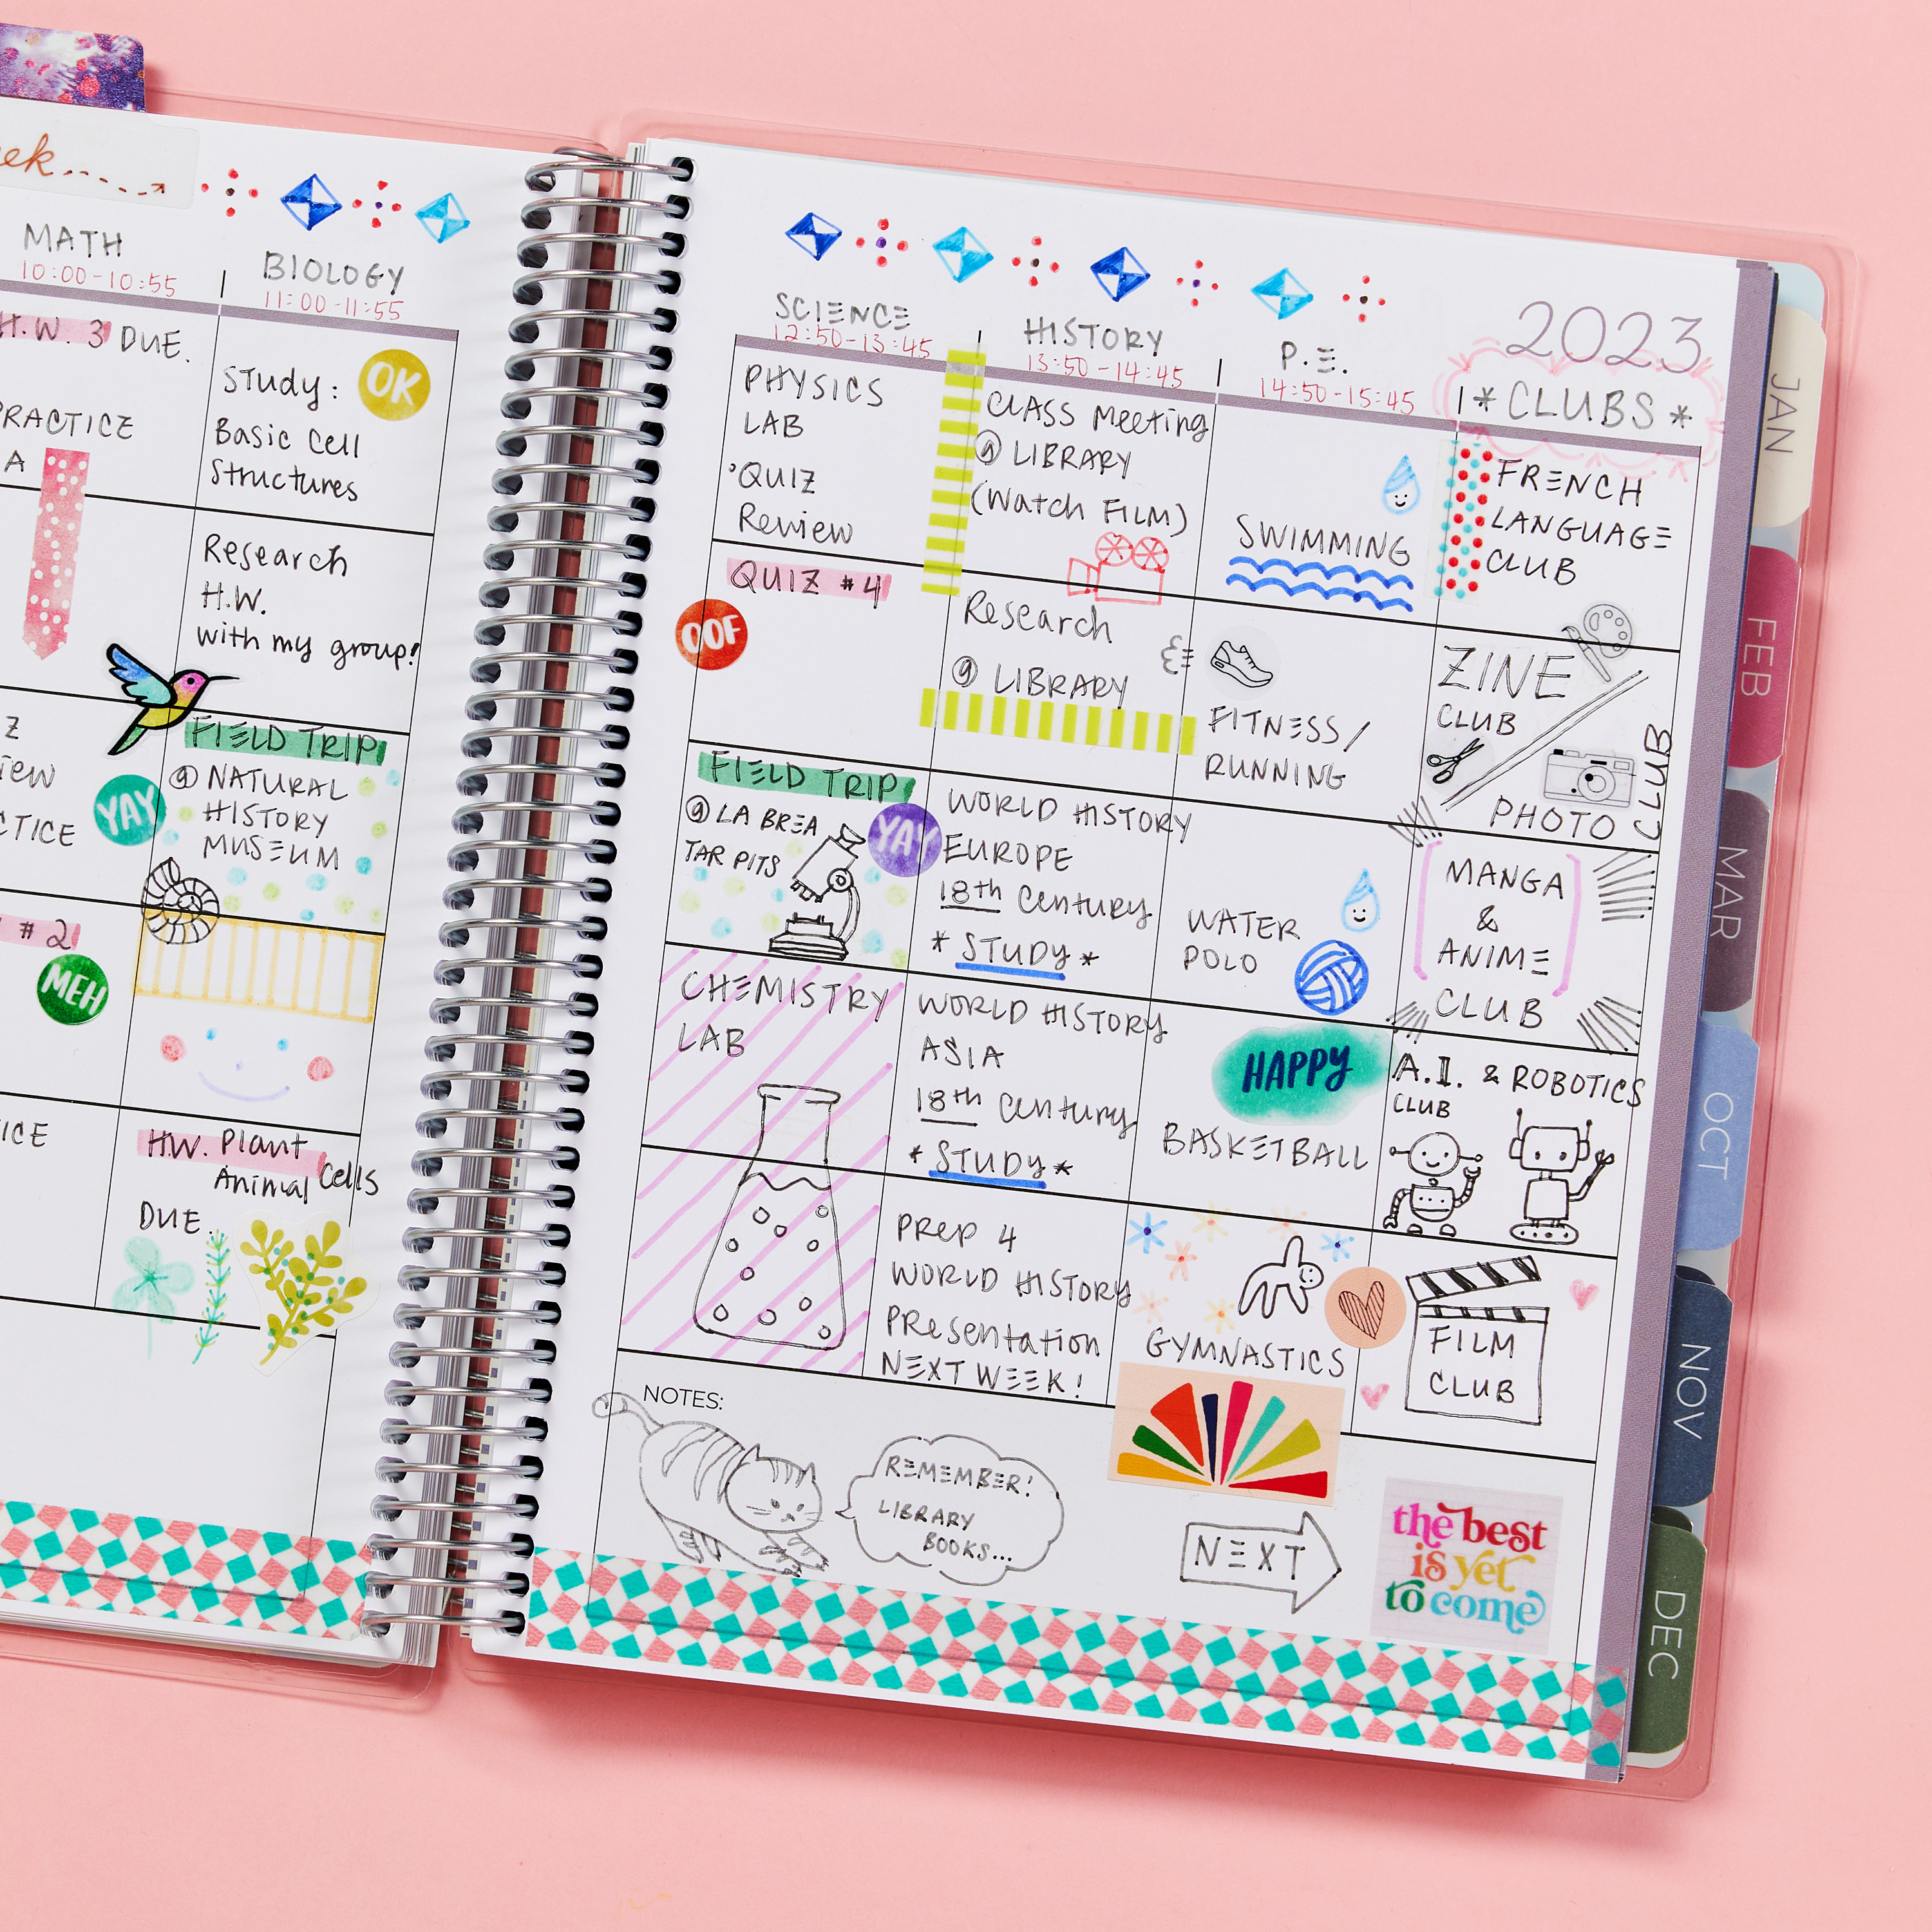 An open Avery academic planner (29874) is shown as an important item for a high school back-to-school checklist. The planner has dated tabs from July to June and is filled in with school planning notes.